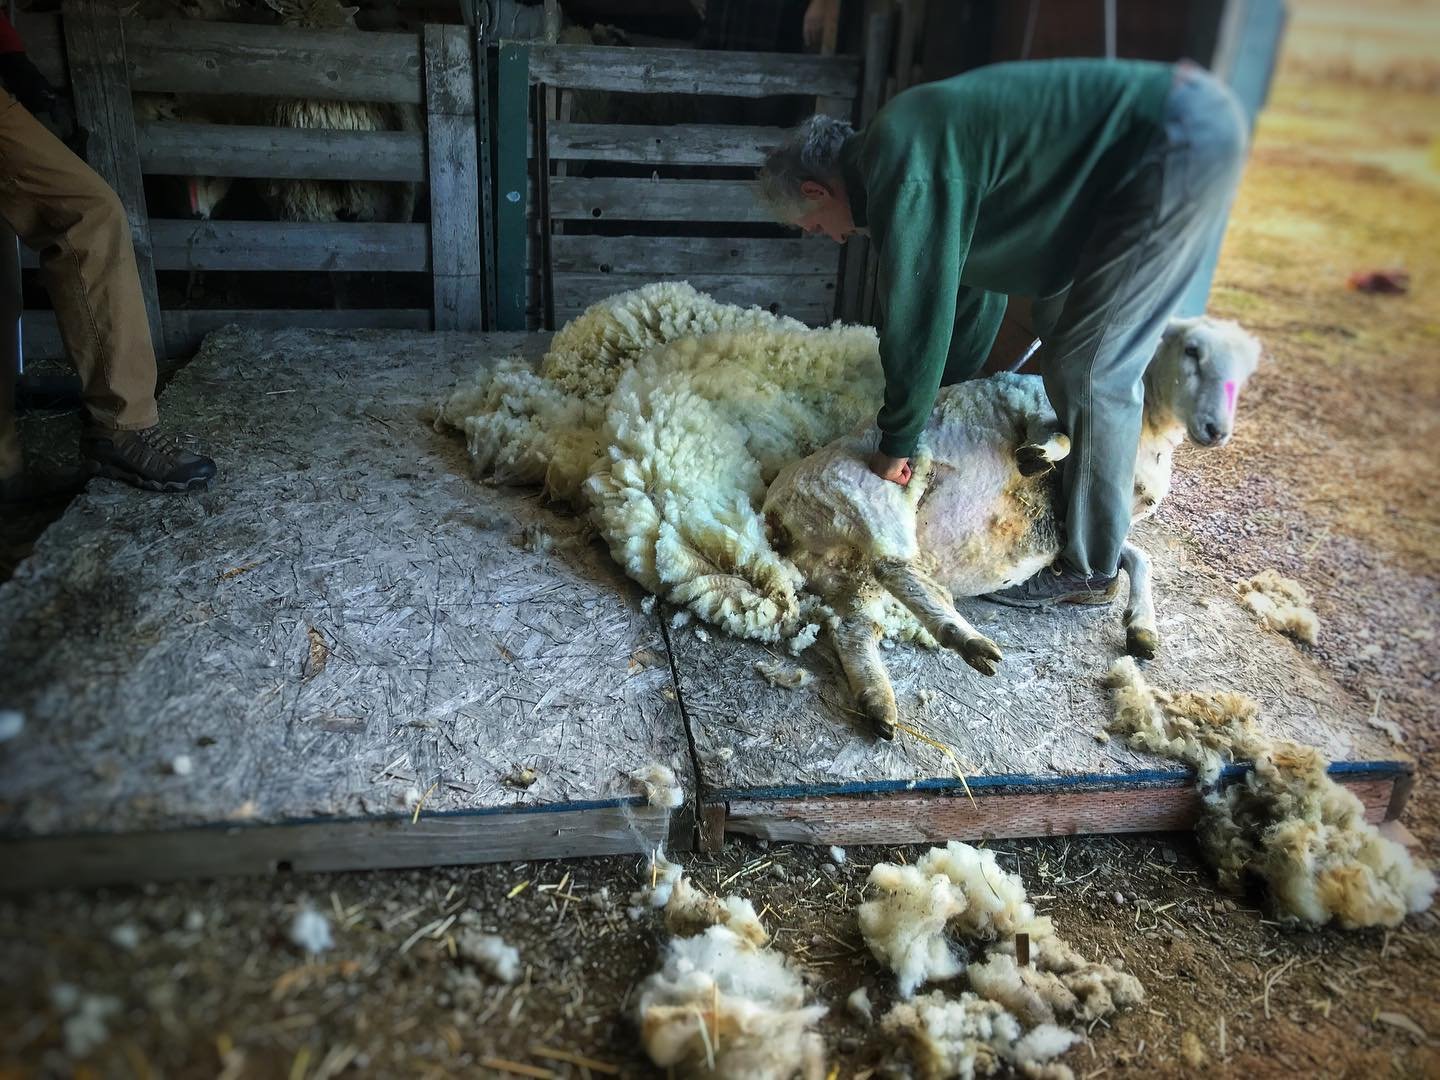 It&rsquo;s always a blast to be part of the crew at the sheep shearing at Glenwood Farm. Ian wrangled about 45 ewes last Sunday to line them up for their haircut. ✂️
.
.
.
.
.
#sheepshearing #sheep #wool #sustainableagriculture #smallfarm #agripics #